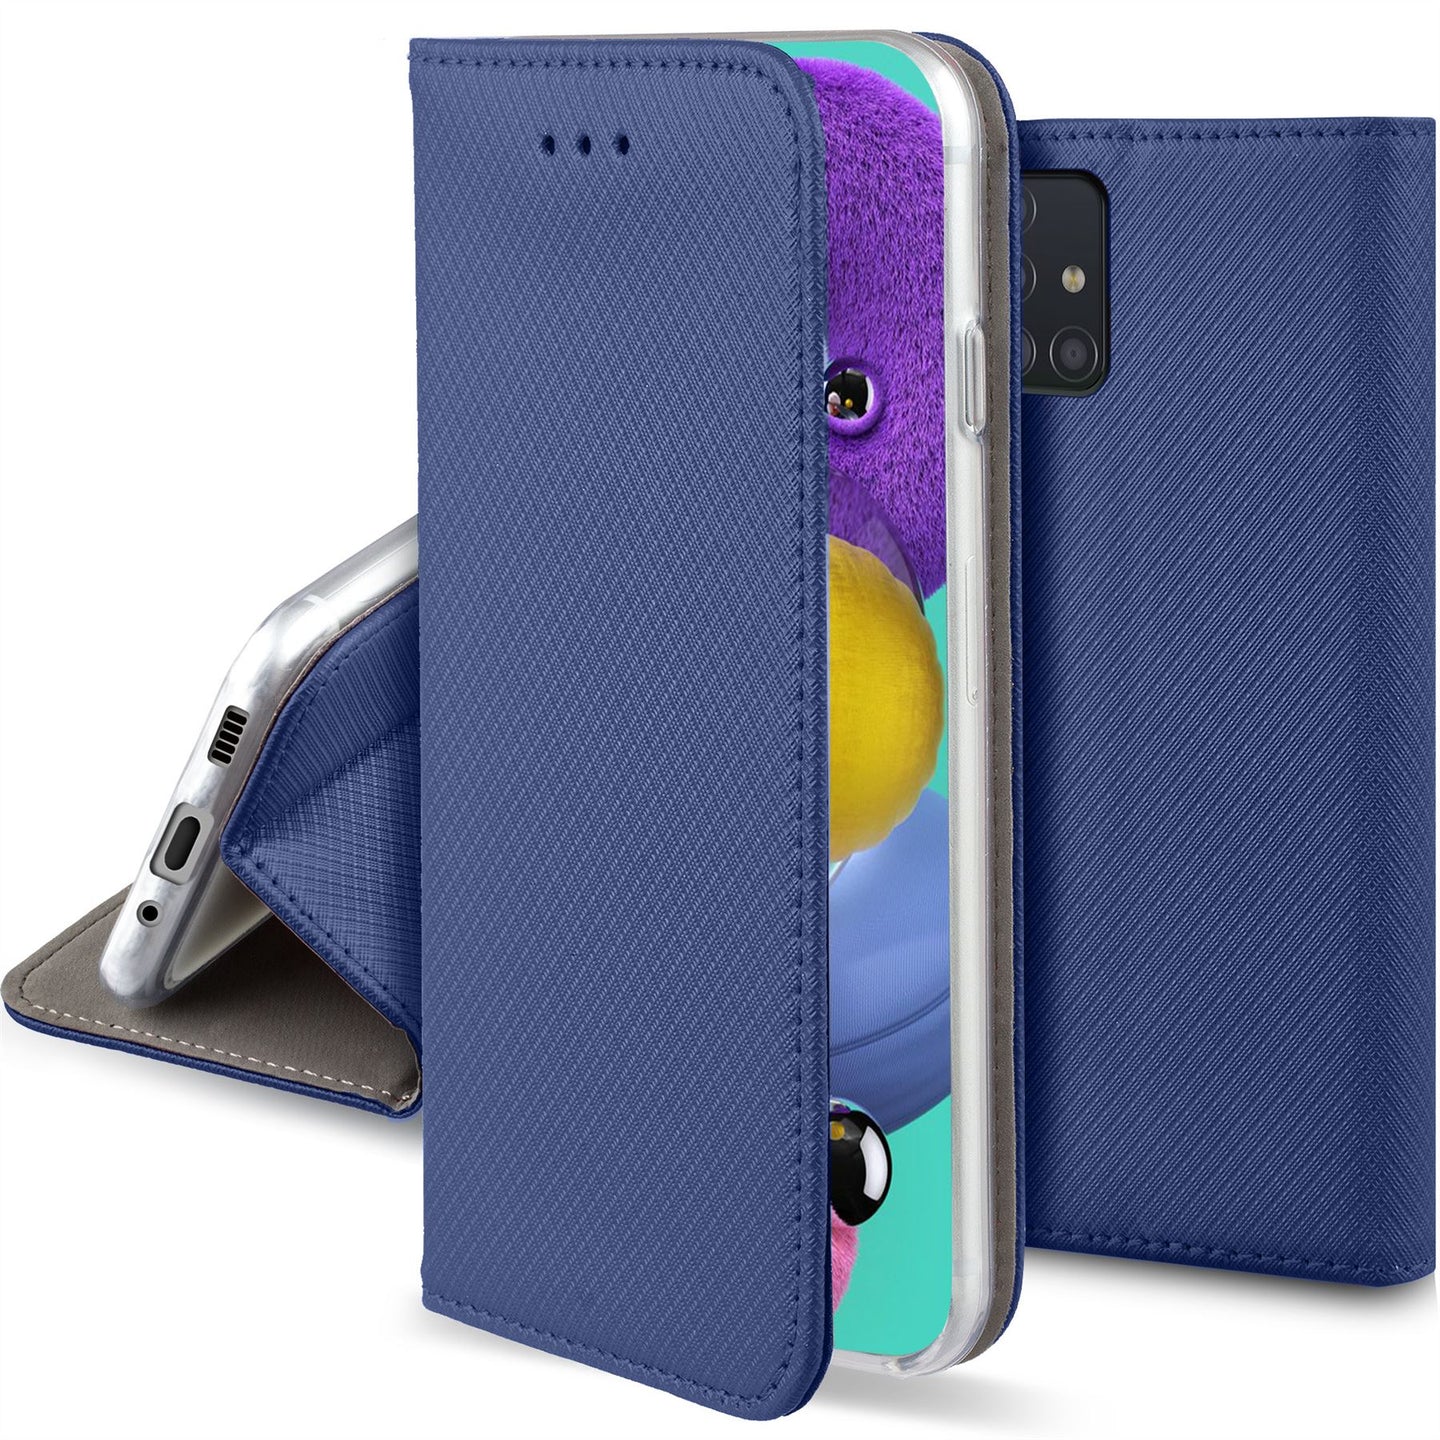 Moozy Case Flip Cover for Samsung A51, Dark Blue - Smart Magnetic Flip Case with Card Holder and Stand